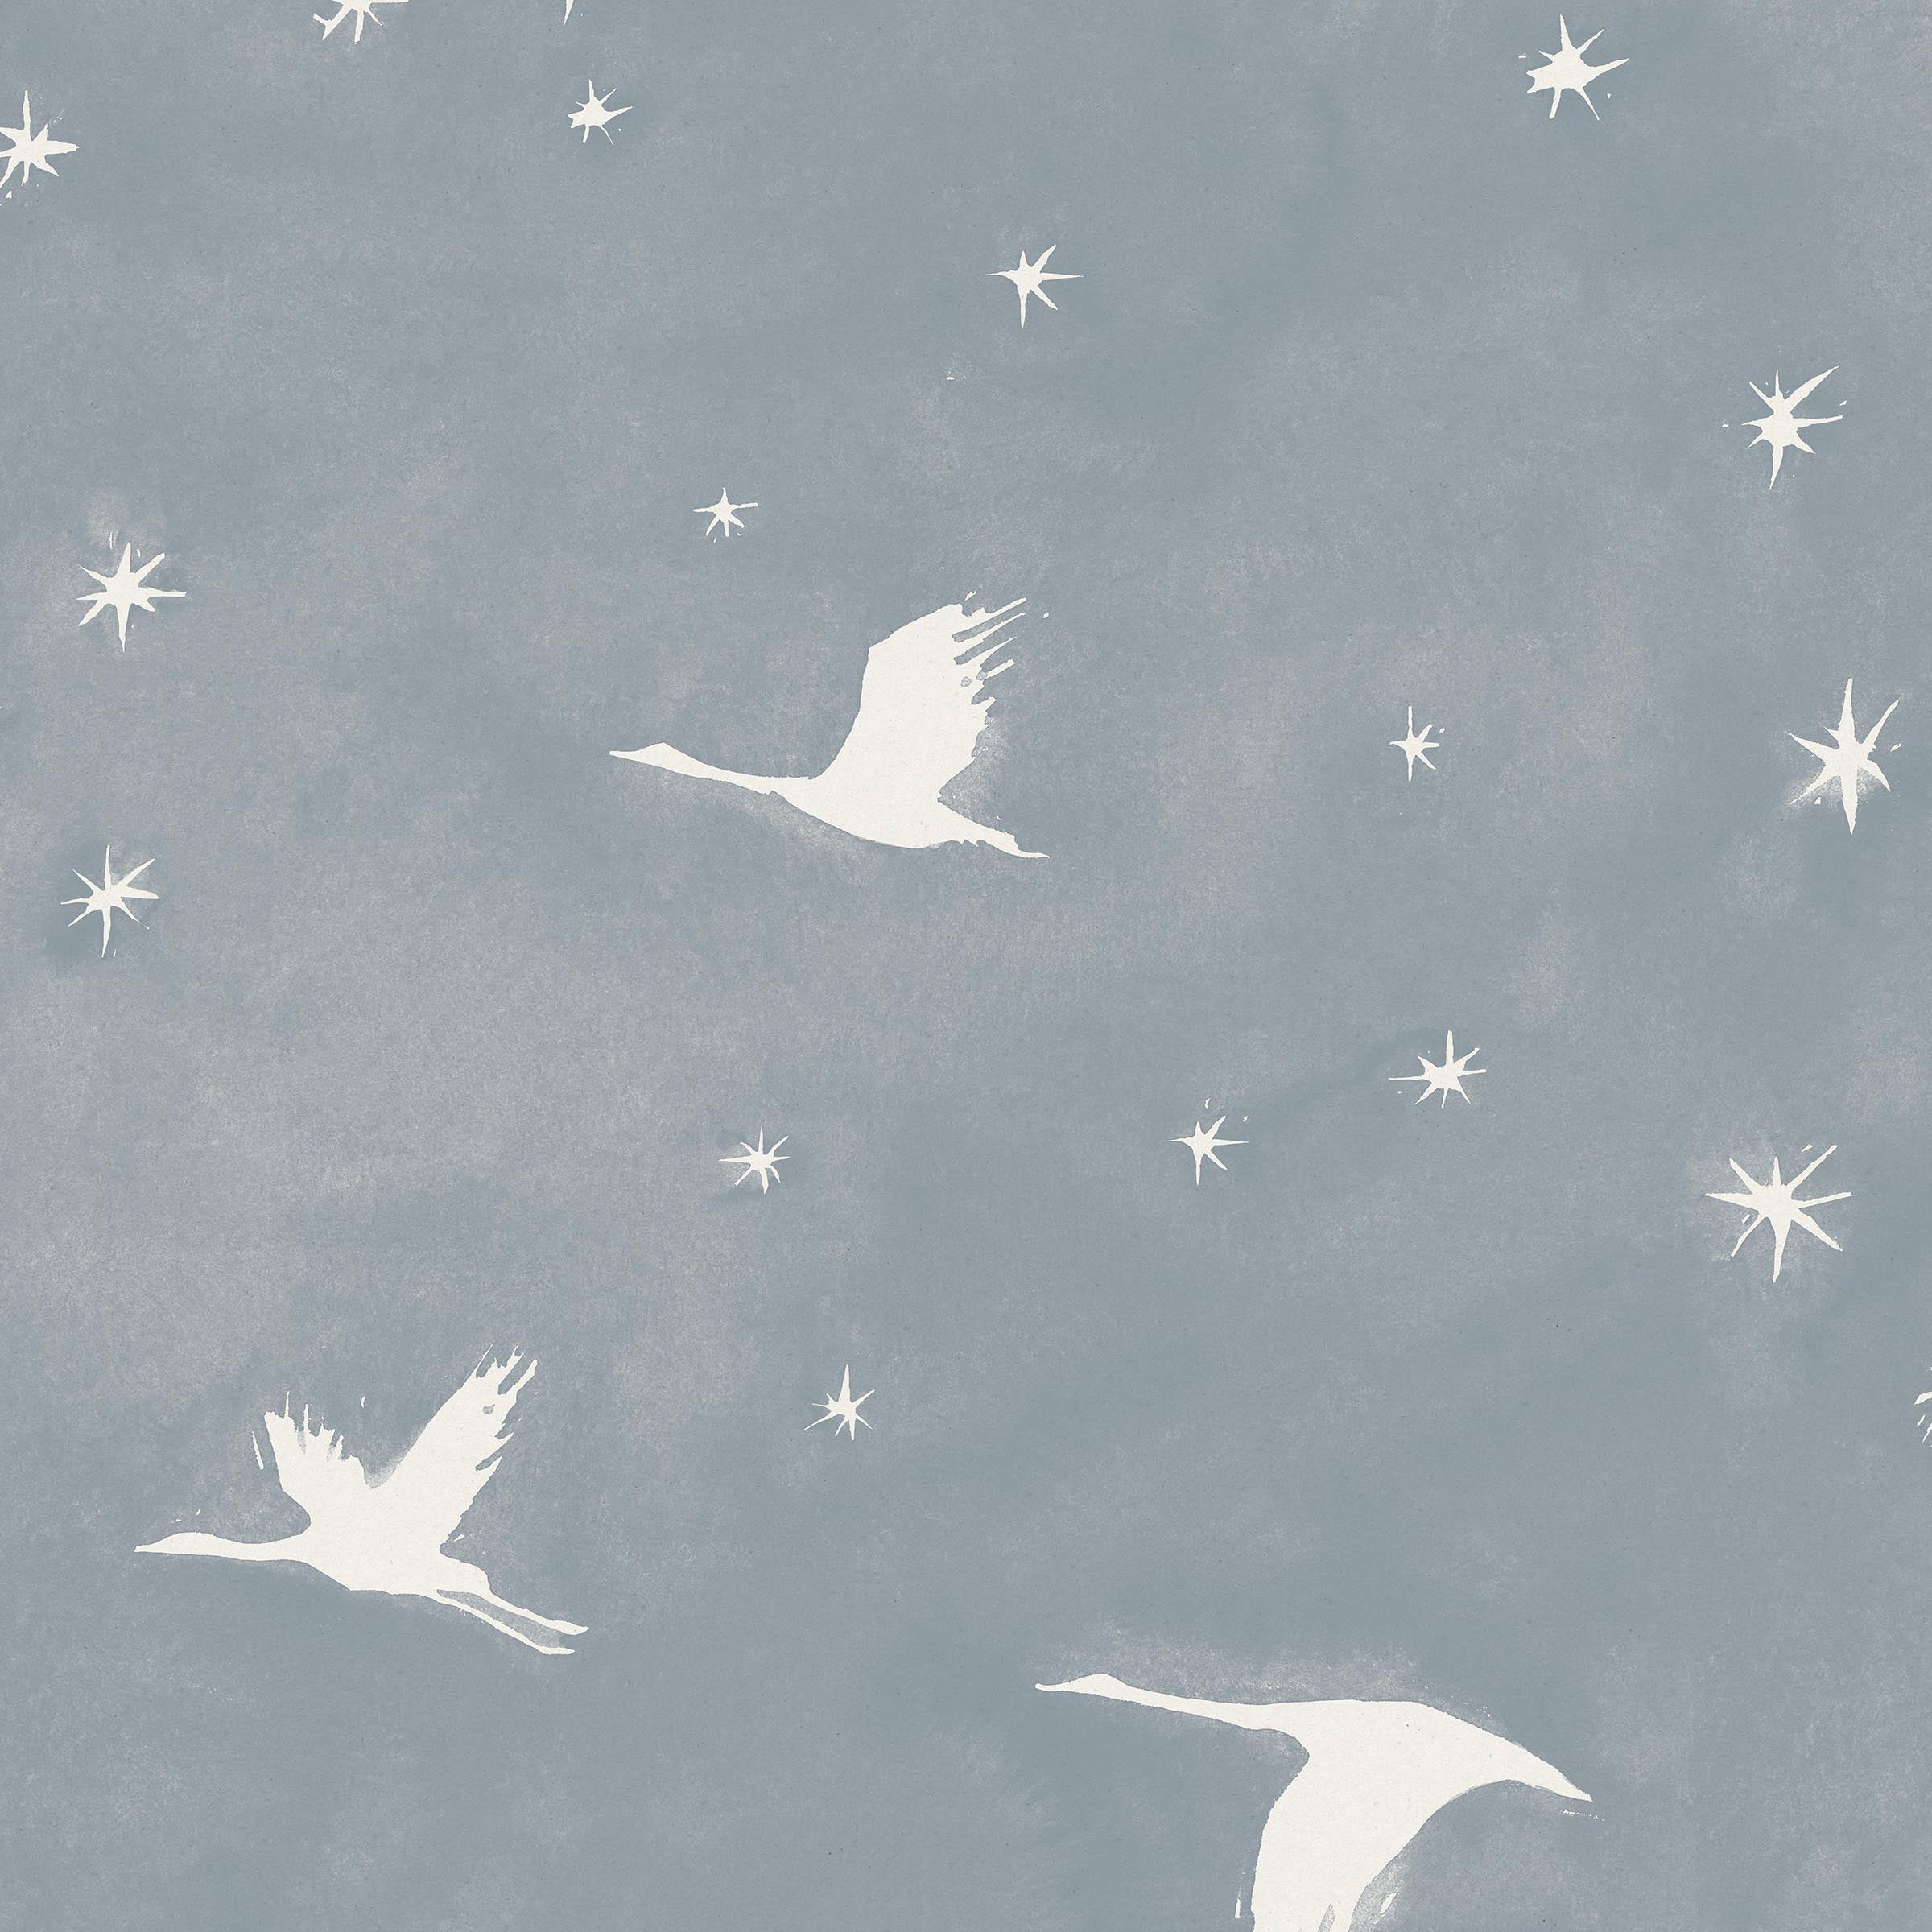 Detail of wallpaper in a repeating print of birds and stars in white on a light blue watercolor field.